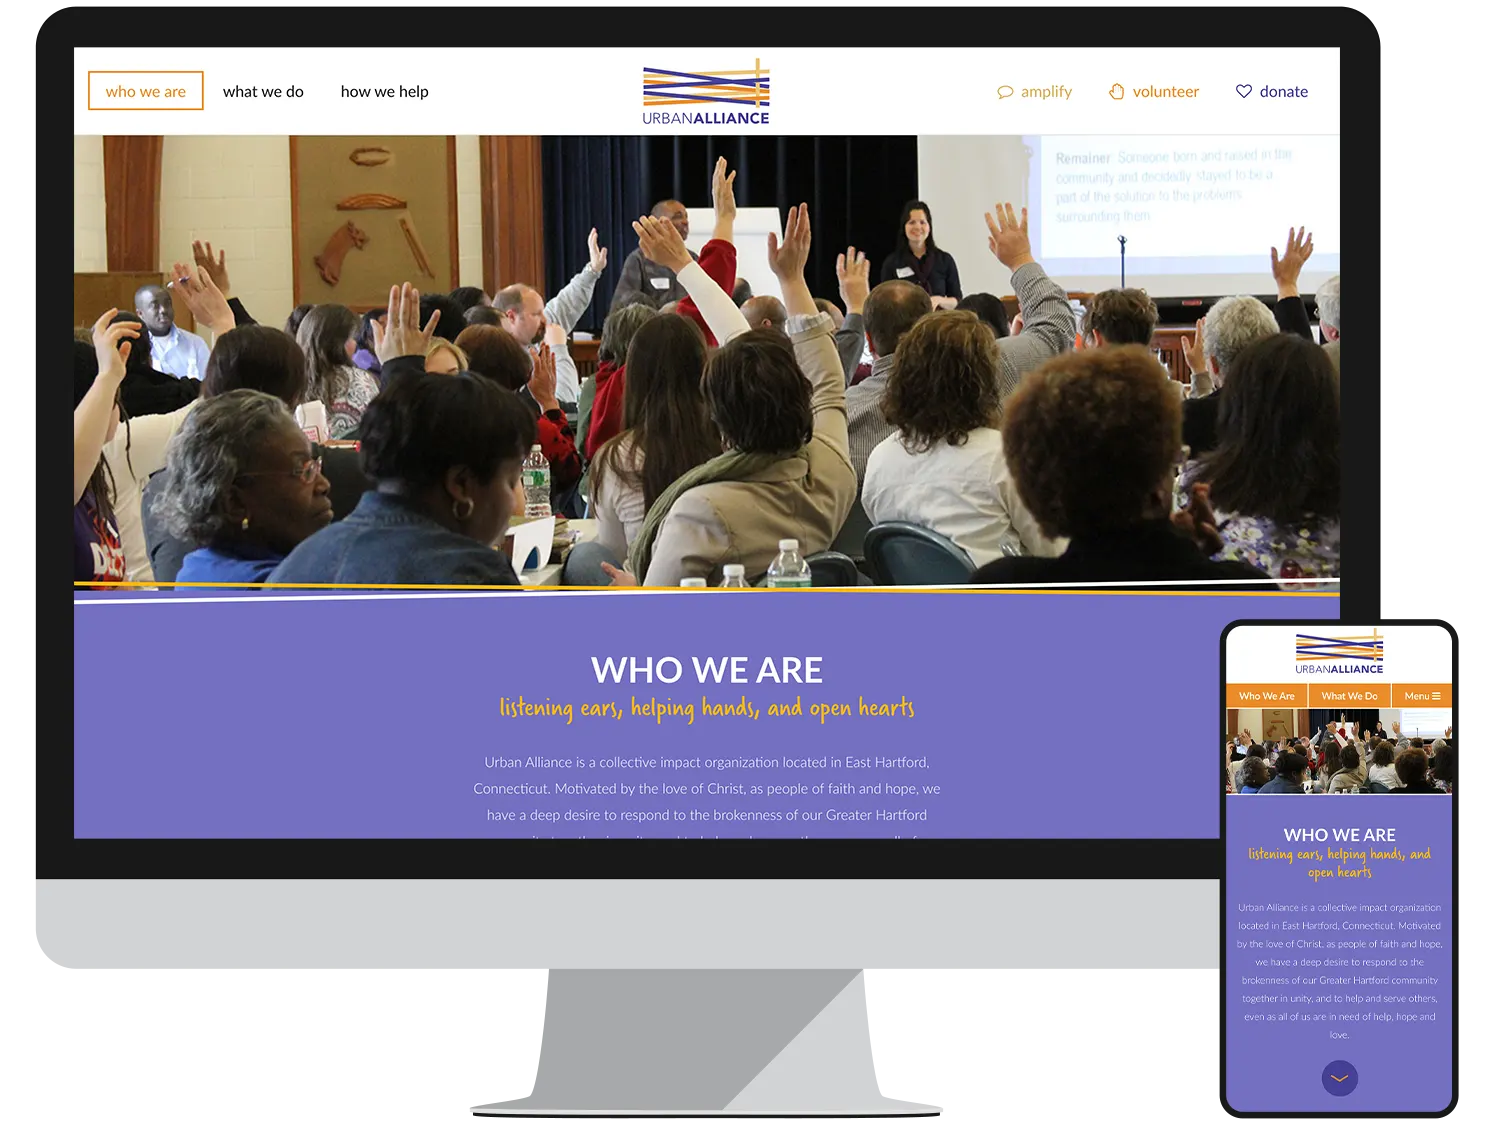 Urban Alliance Landing Page - Who We Are